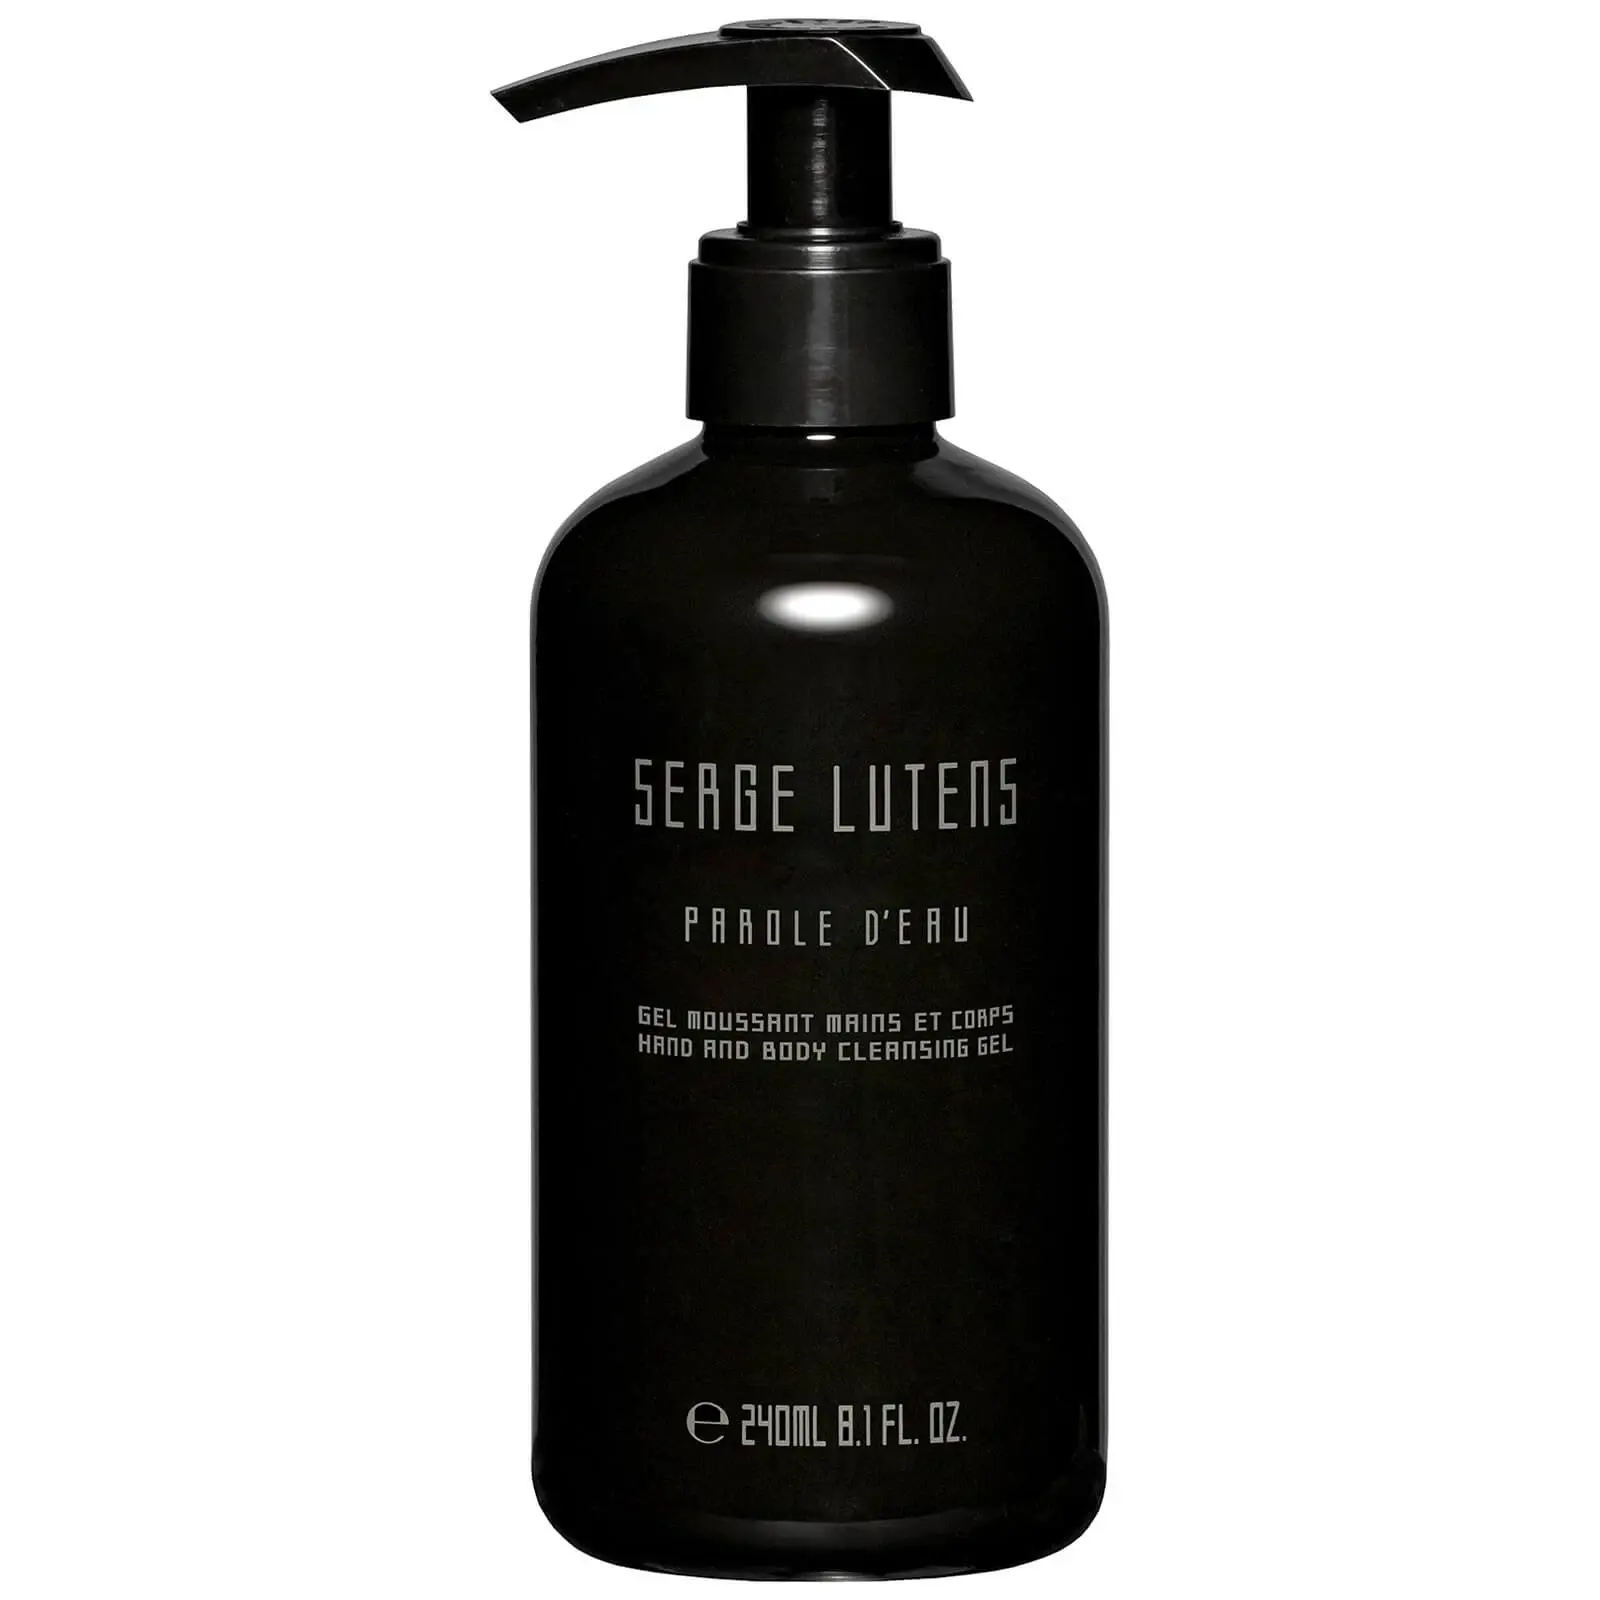 Serge Lutens - Parole D'eau Hand and Body Cleansing Gel 240ml